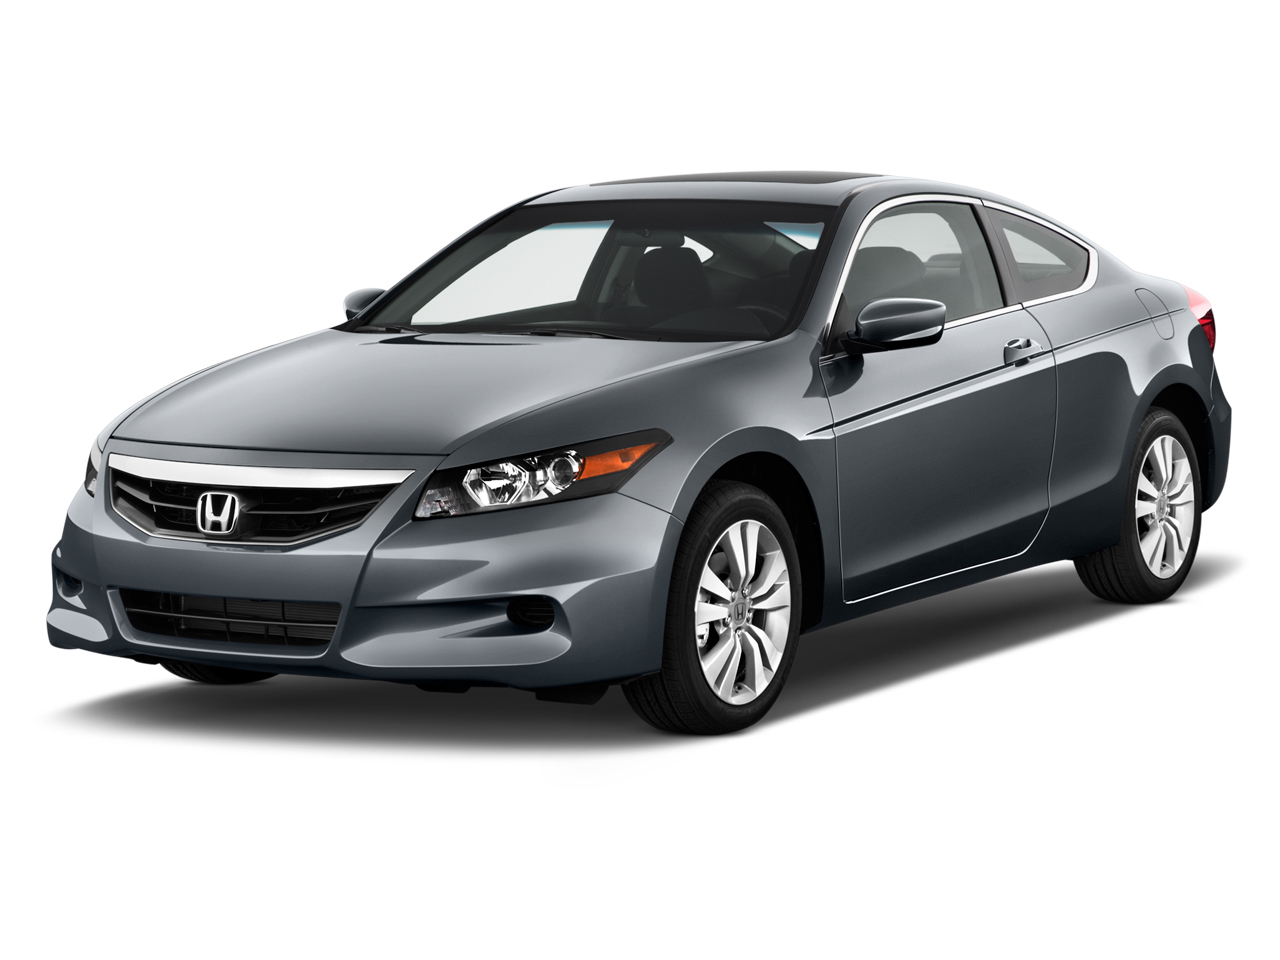 2012 Honda Accord oem parts and accessories on sale